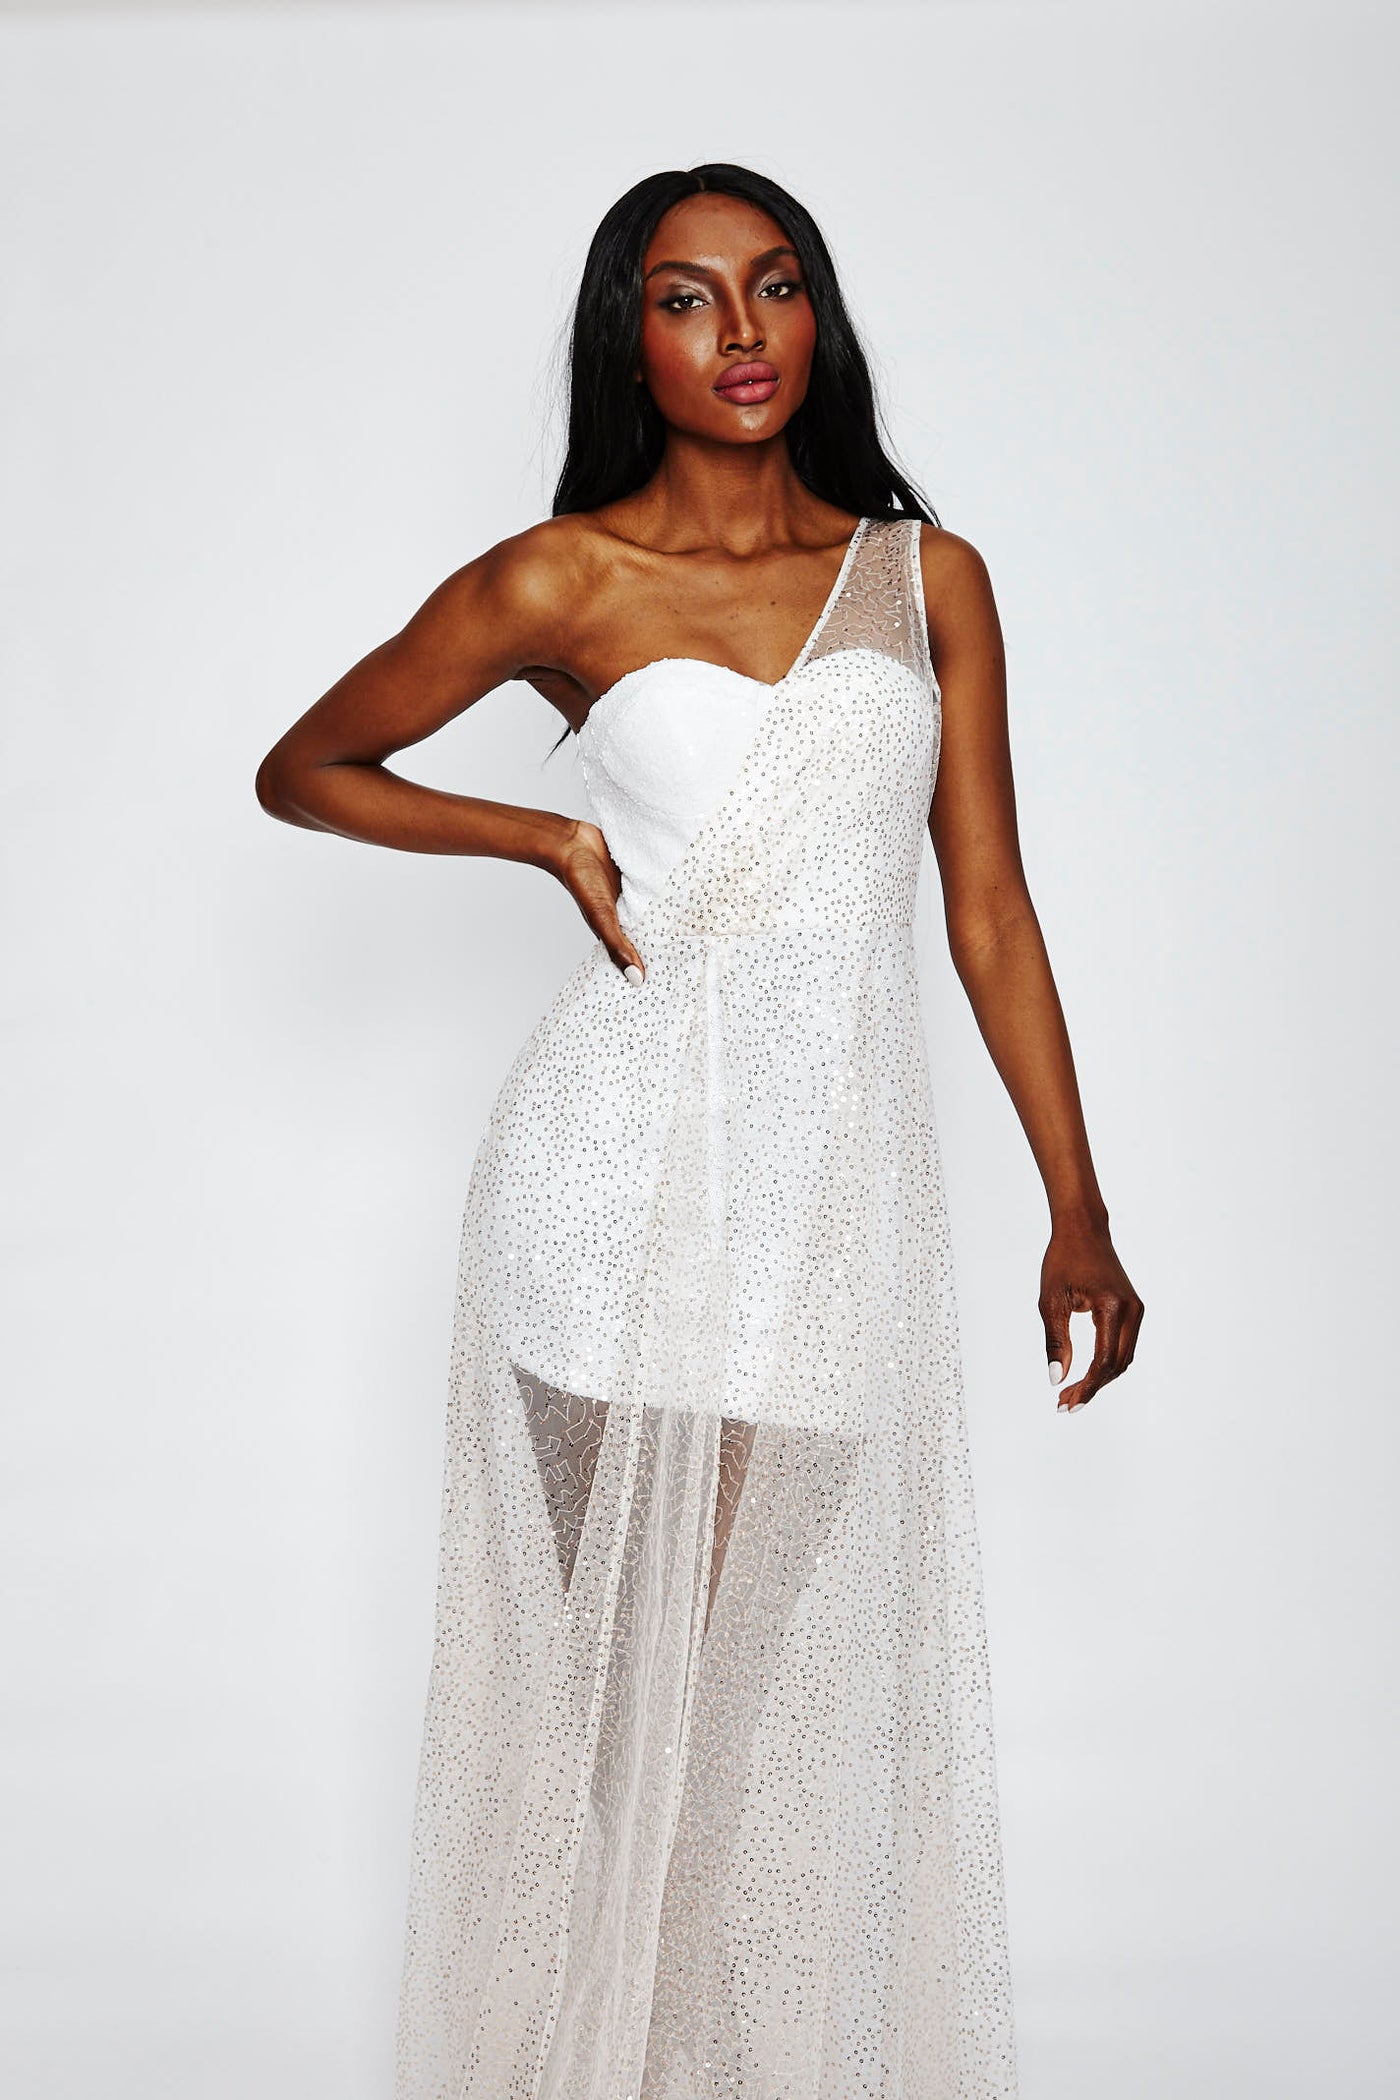 Pixie Dust One Shoulder Dress by Bariano - RENTAL